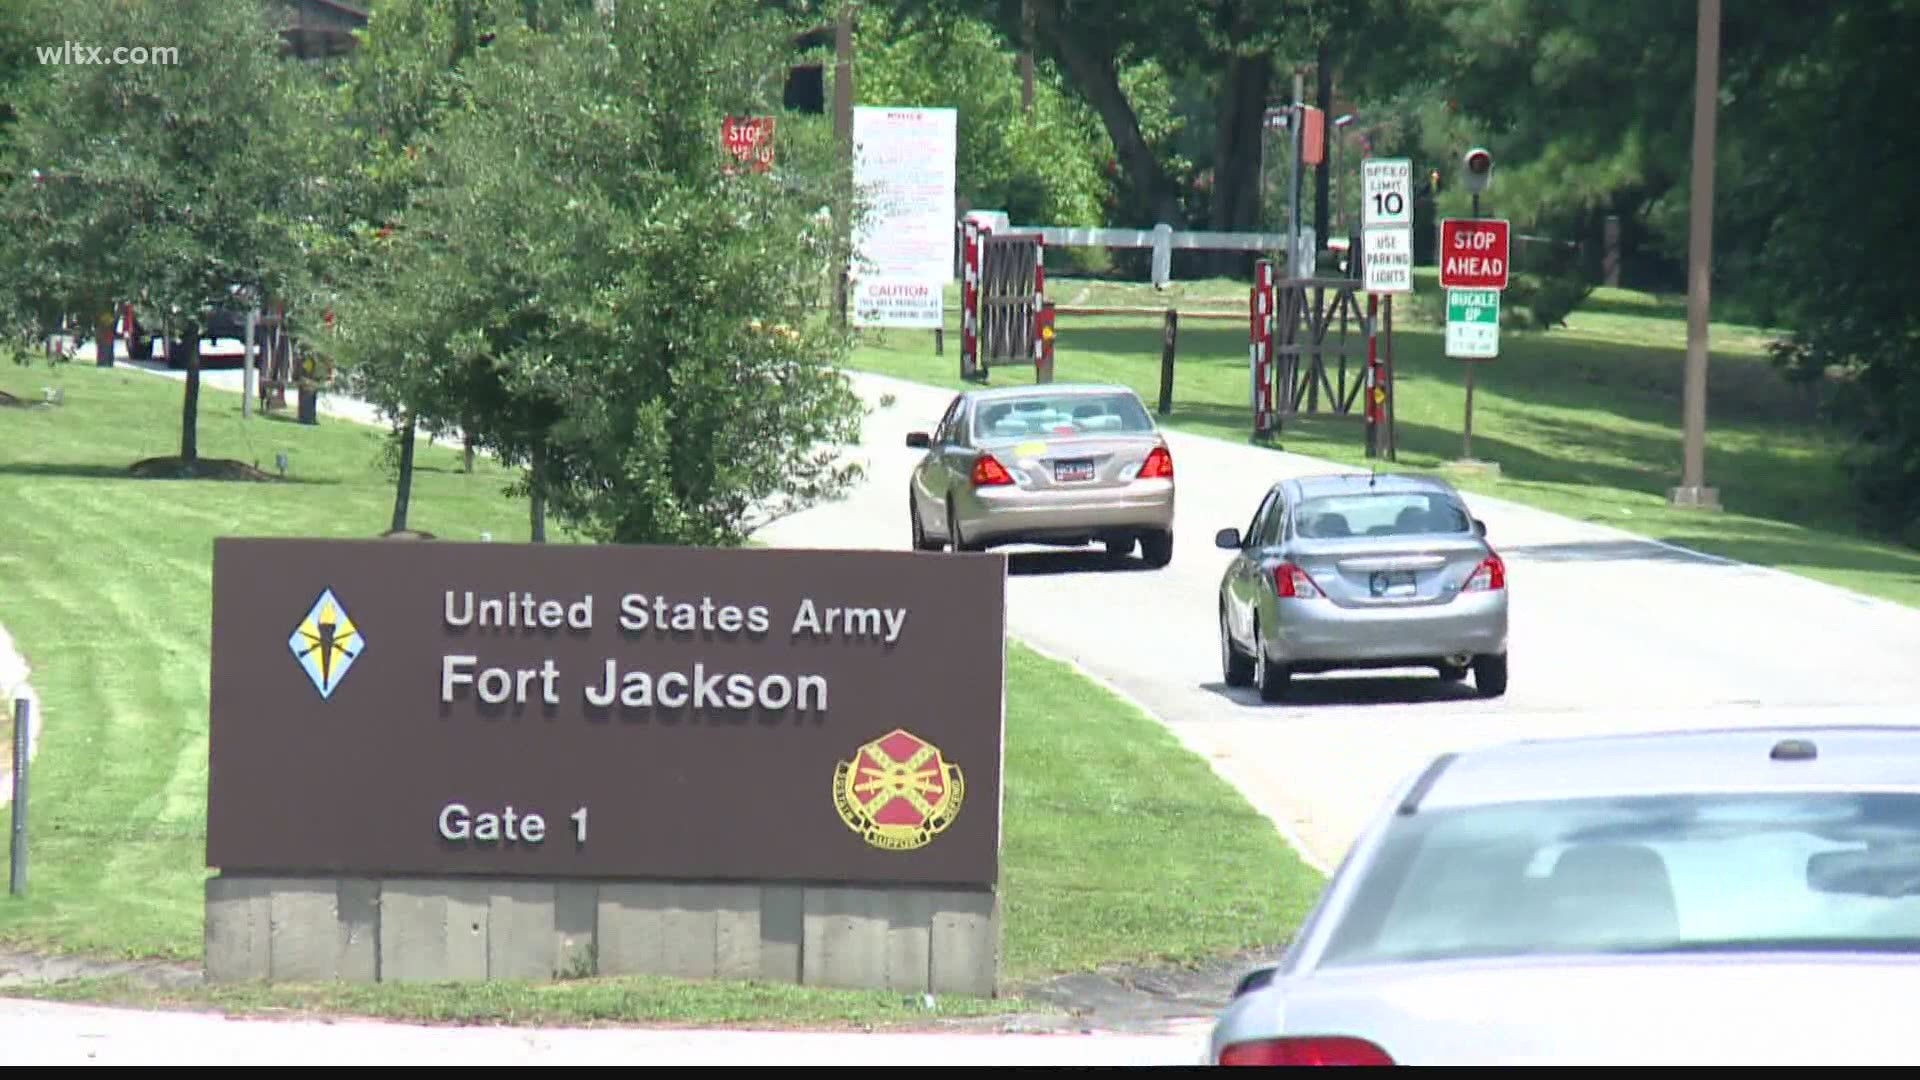 Fort Jackson says an active duty basic combat training trainee was shot just before a basic training exercise was set to begin.